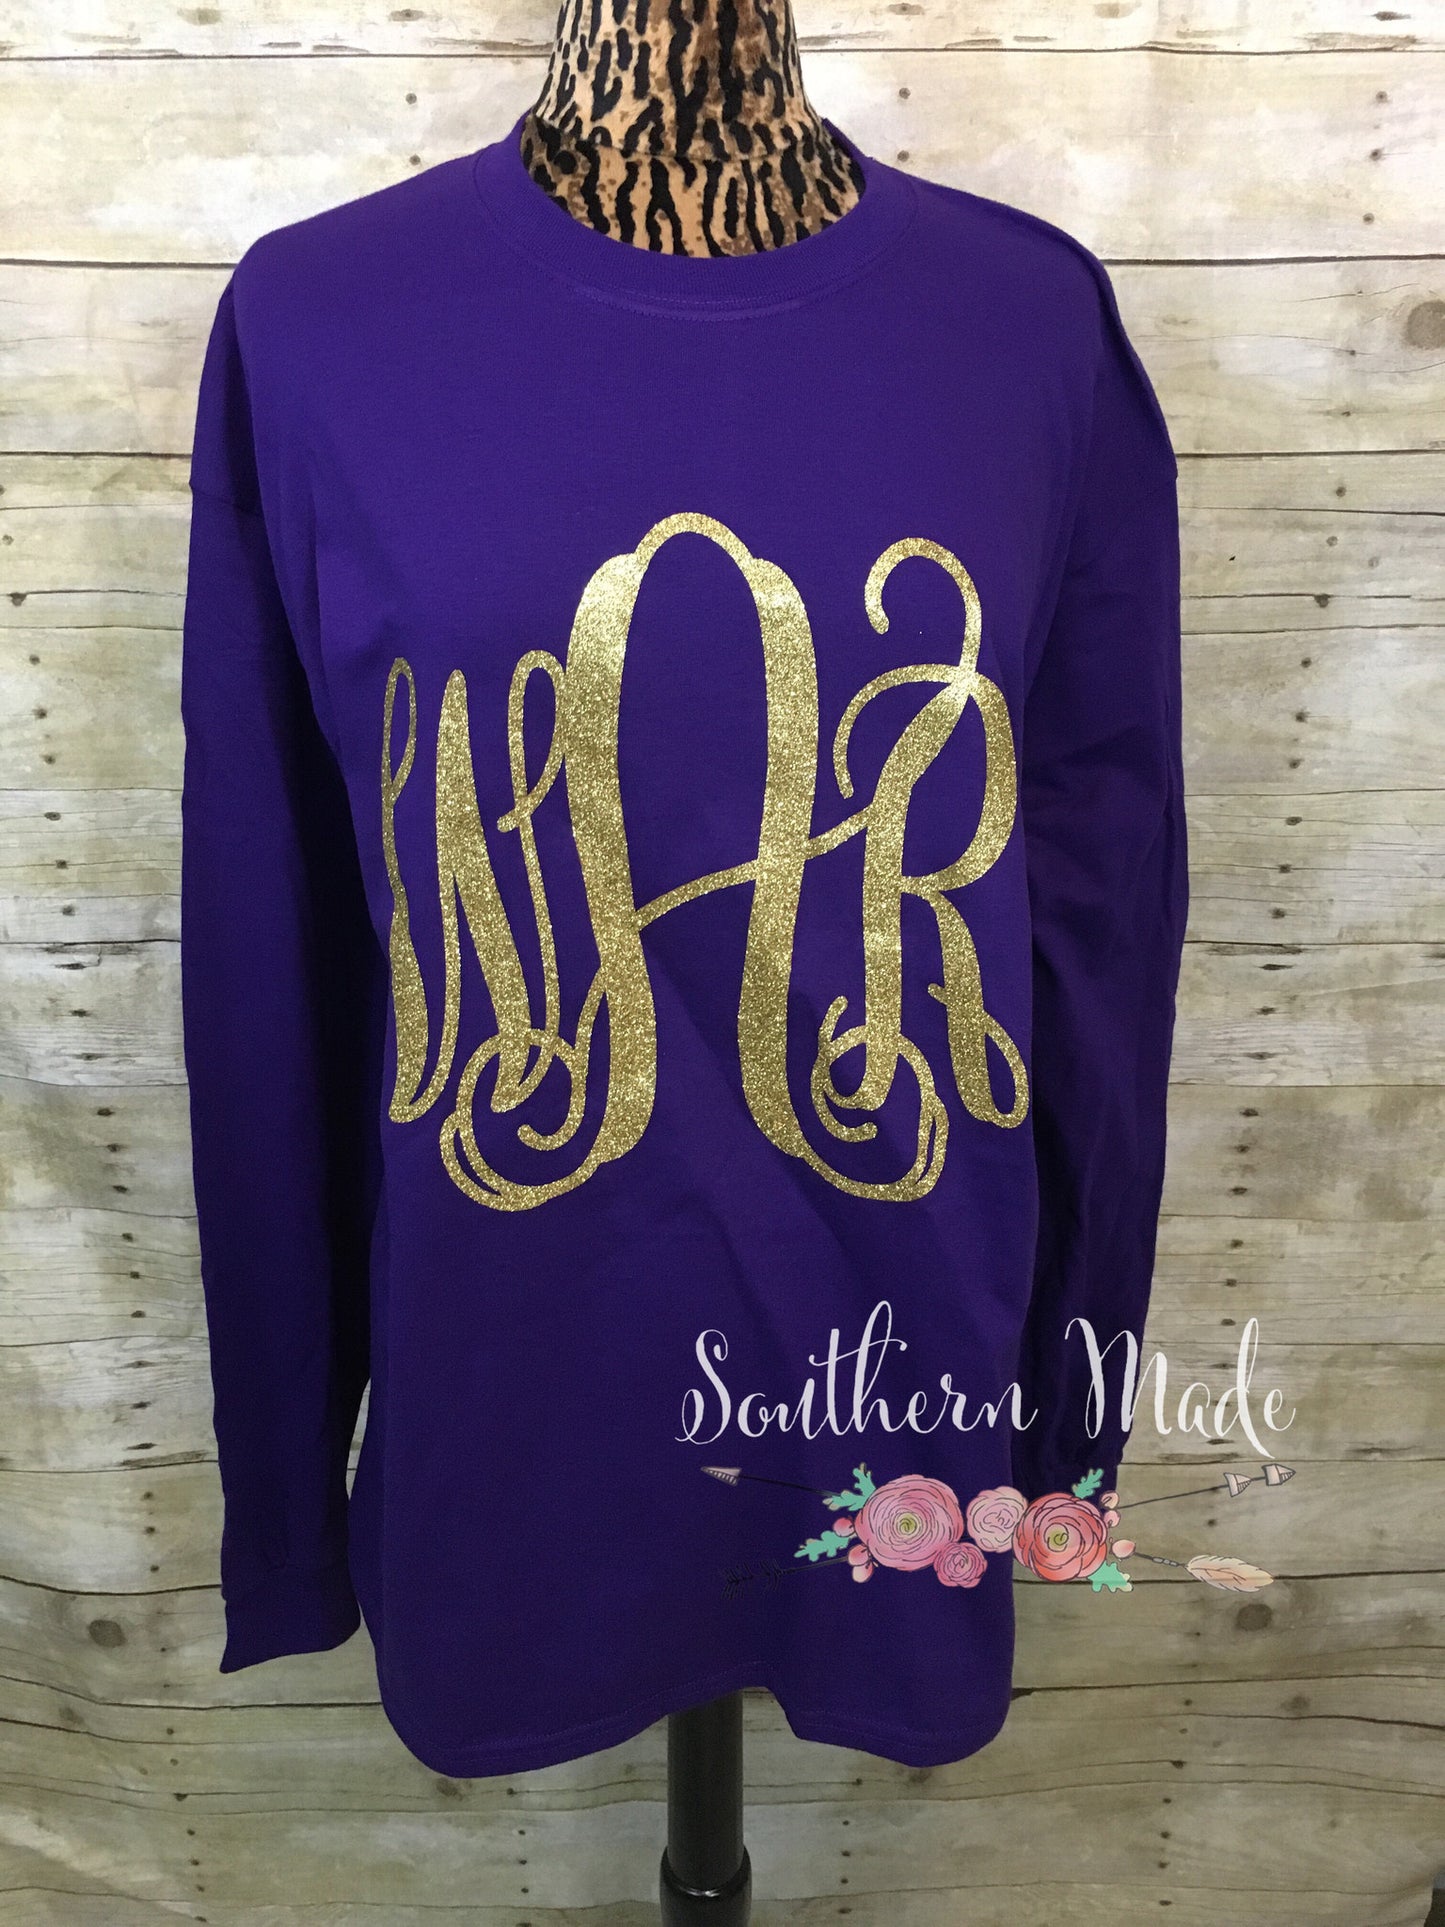 Comfort Colors Short Sleeve Tee with Large Front Monogram